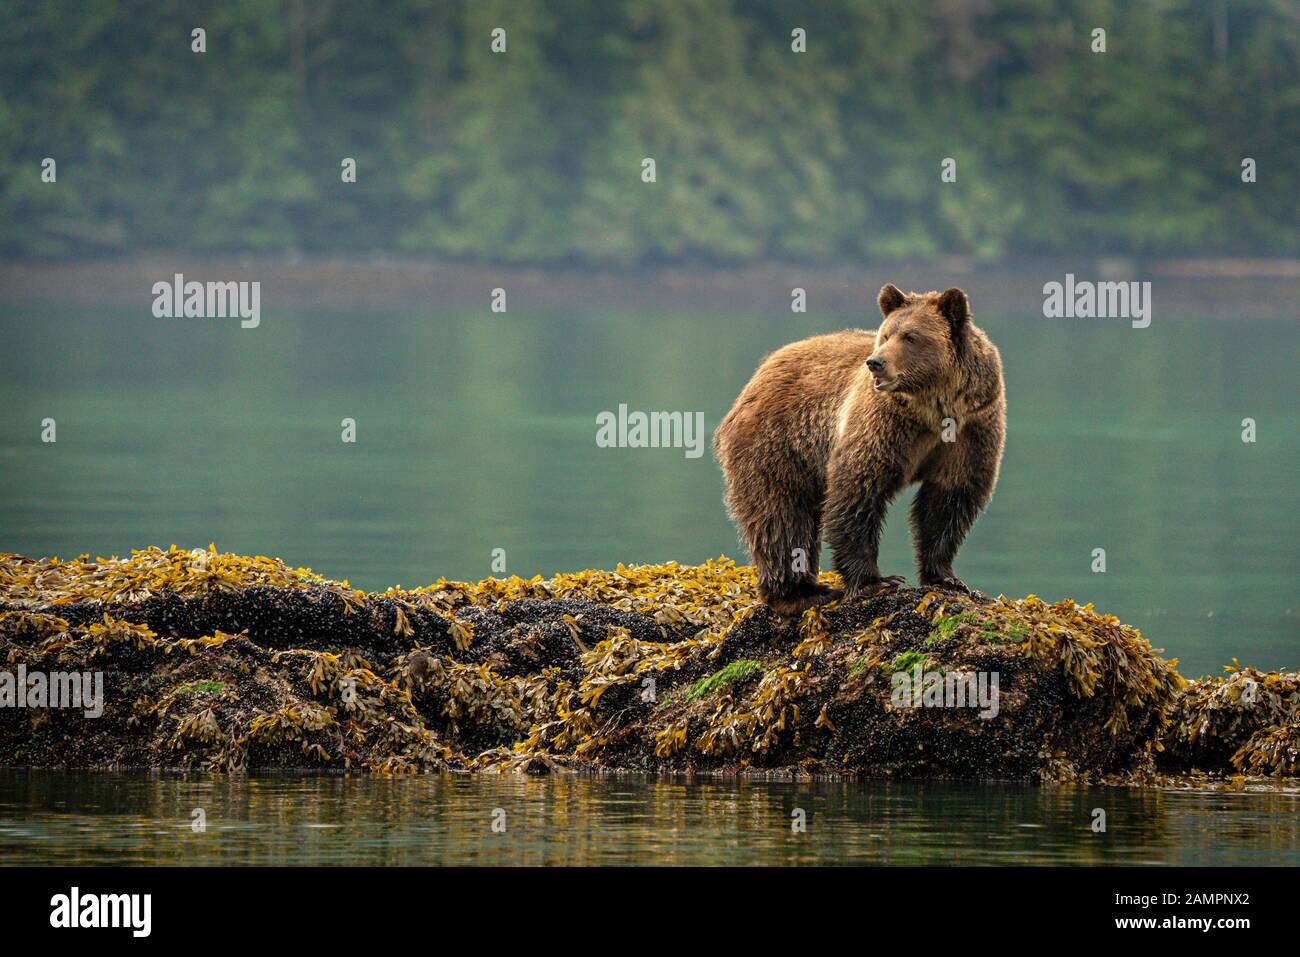 Grizzly bear foraging on mussels along the low tide line in Knight Inlet, First Nations Territory, British Columbia, Canada. Stock Photo